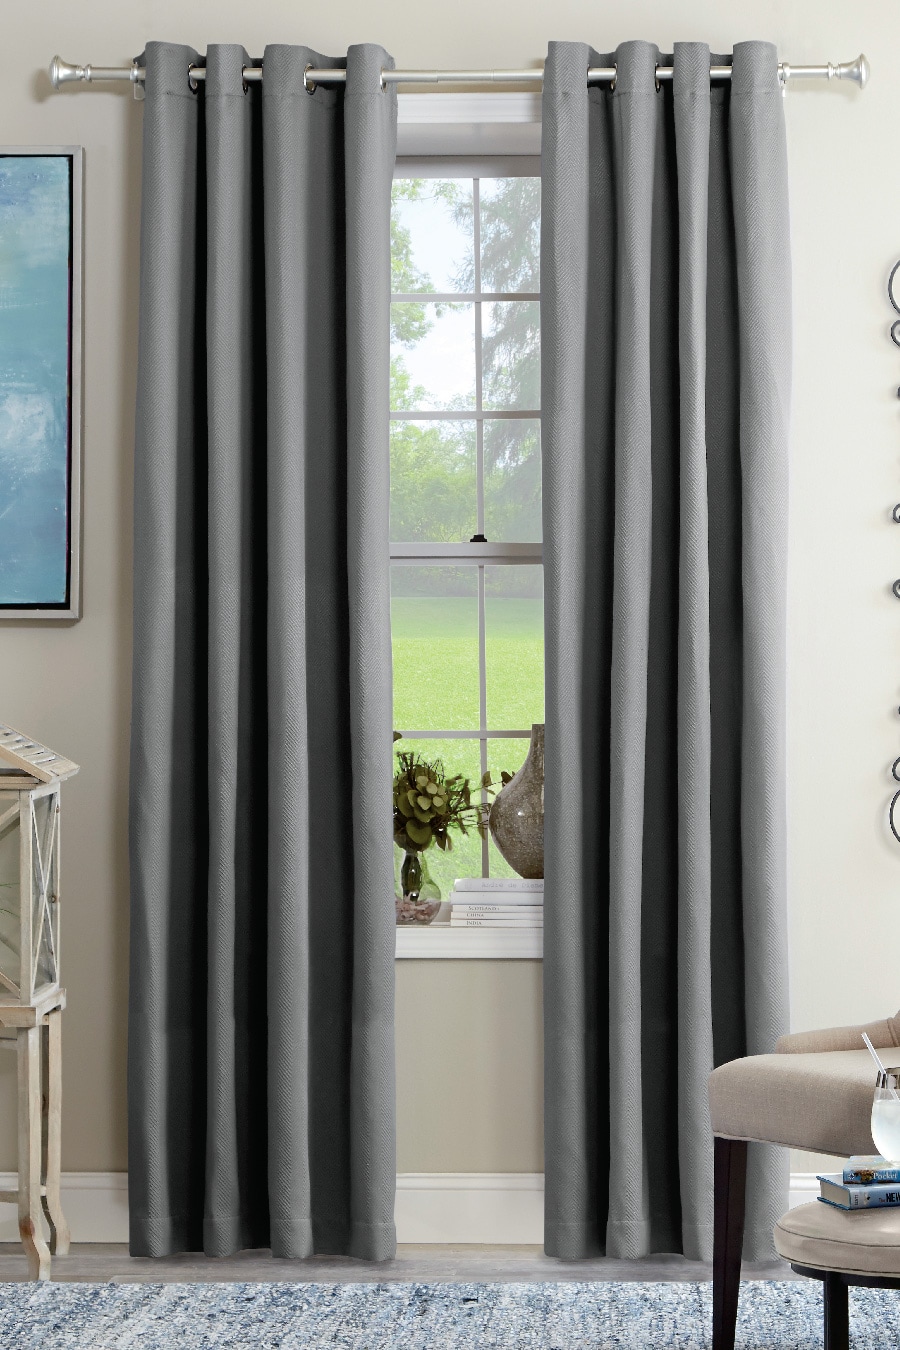 Velcro Curtains, Bedroom Shading Curtains (1 Piece)beige